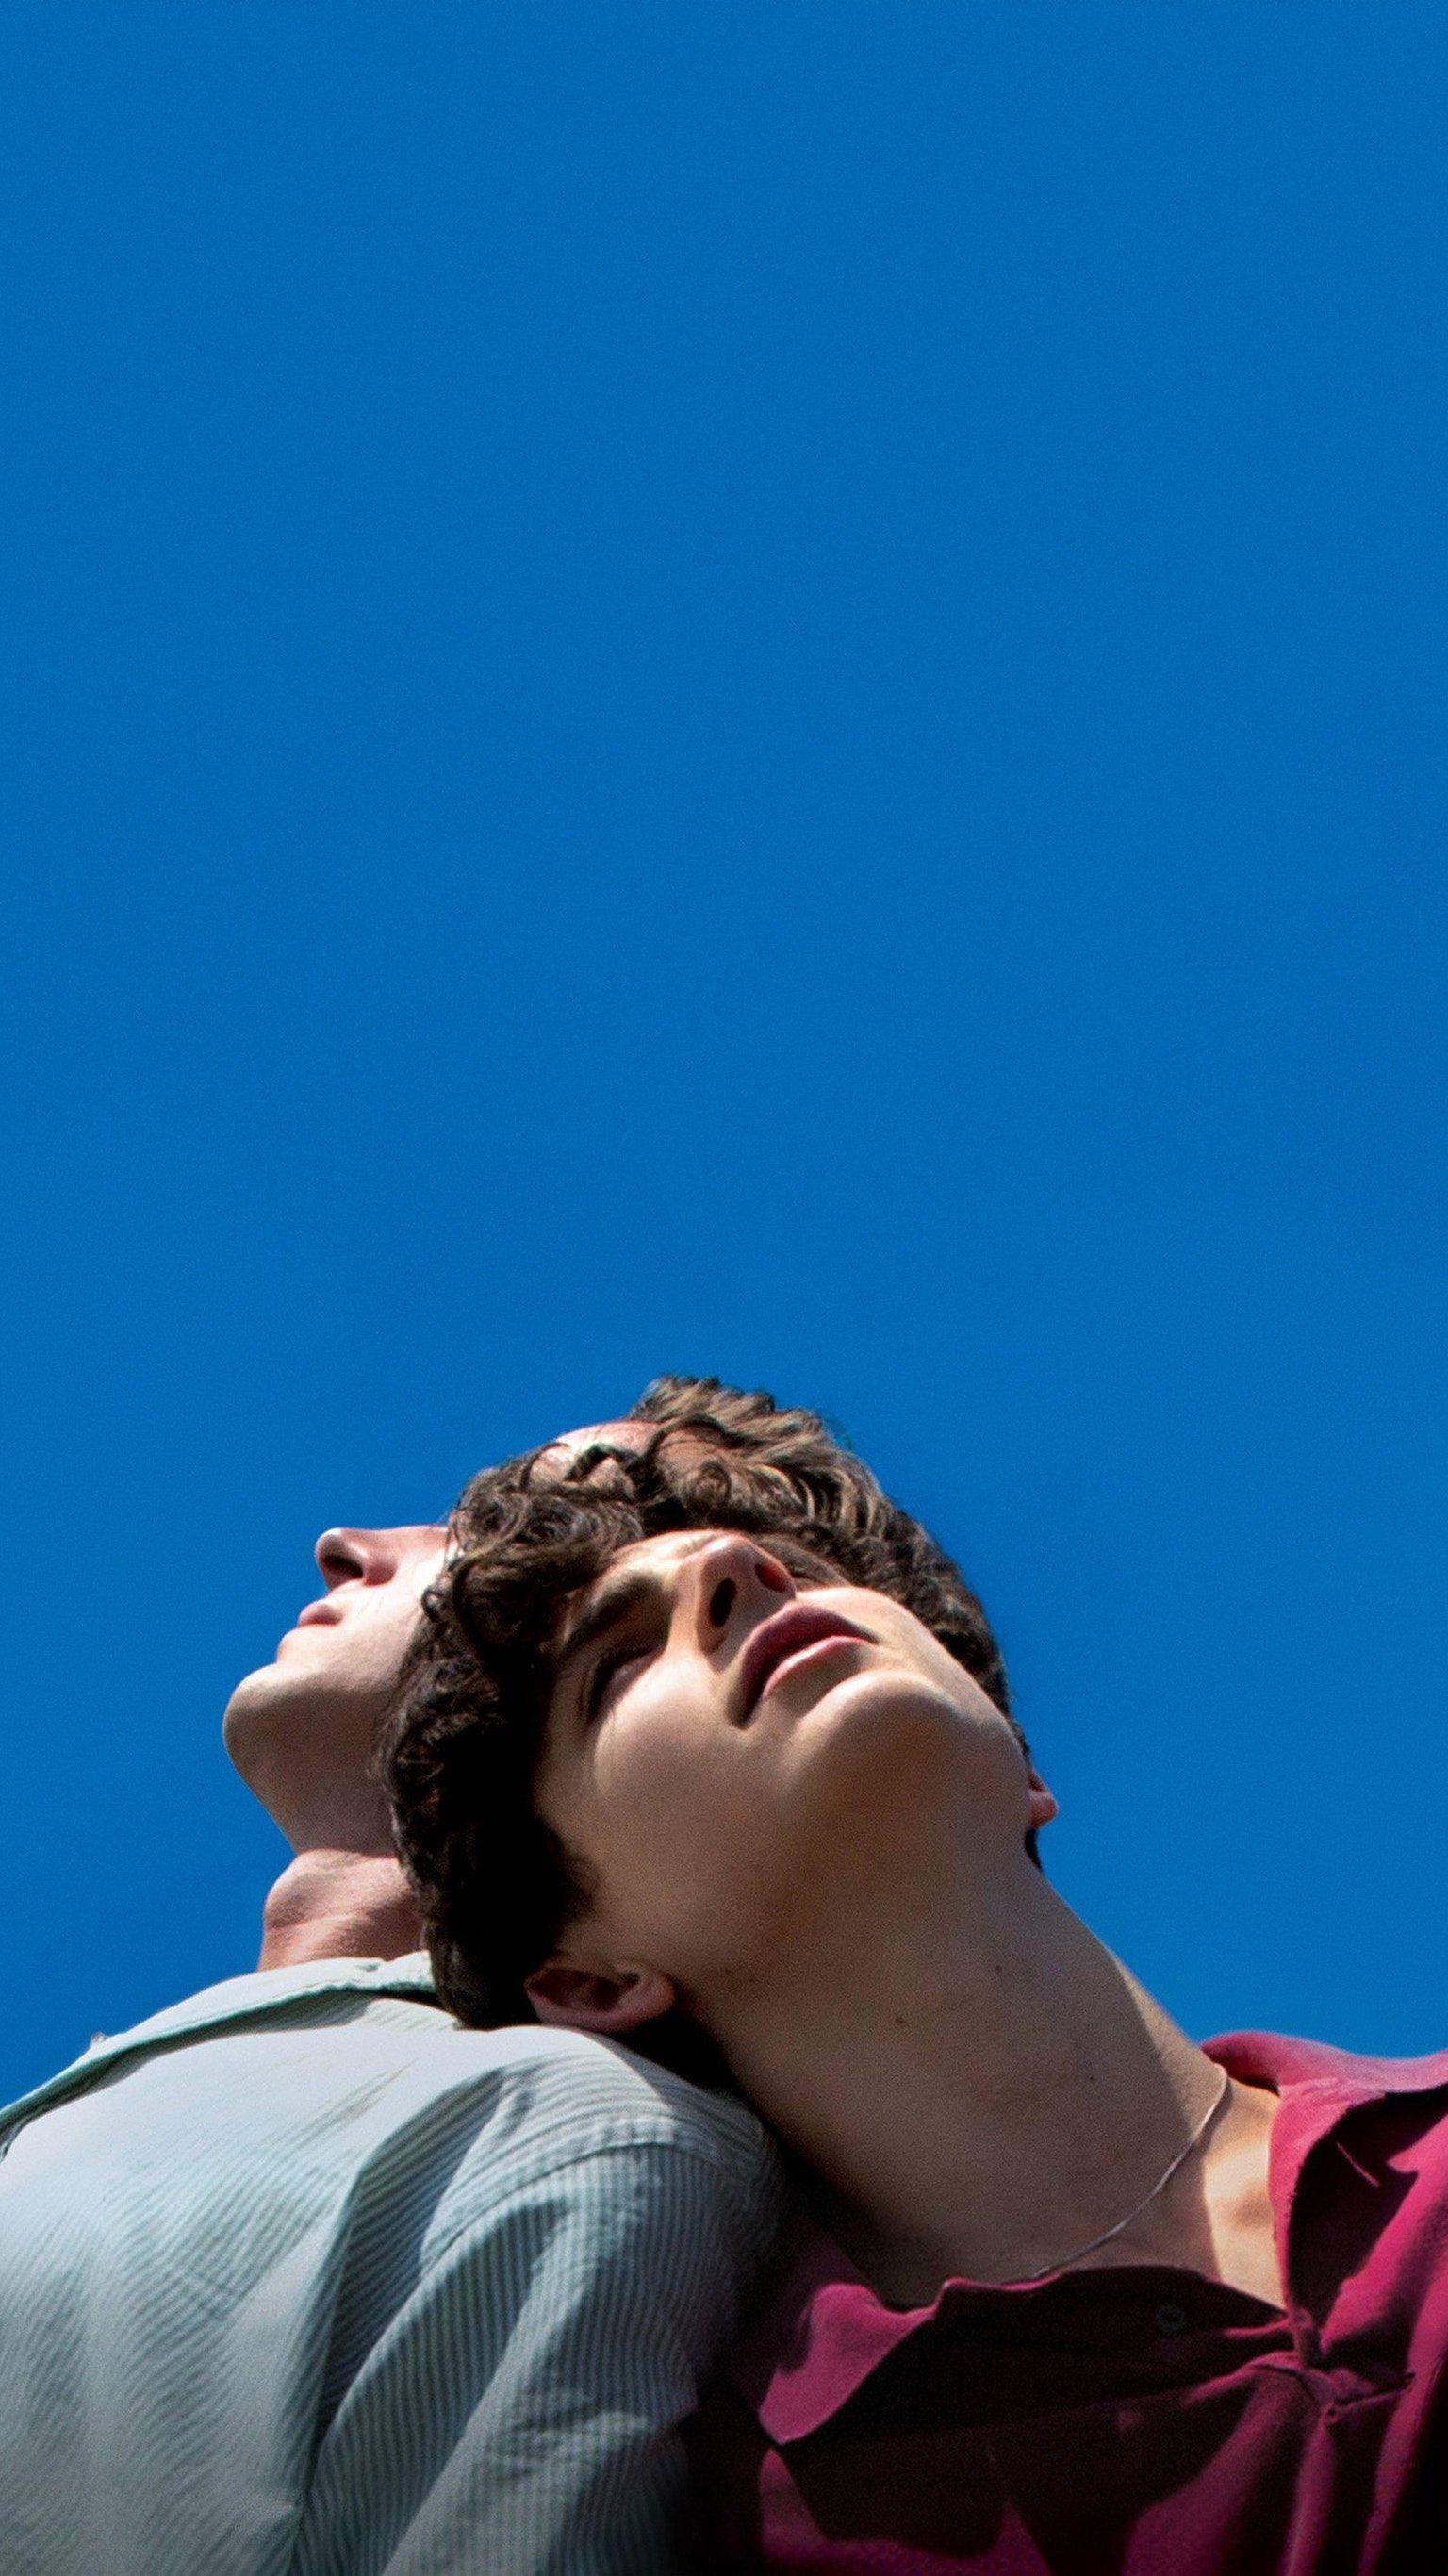 Call Me by Your Name (2017) Phone Wallpaper. Moviemania. Your name wallpaper, Name wallpaper, Timothee chalamet